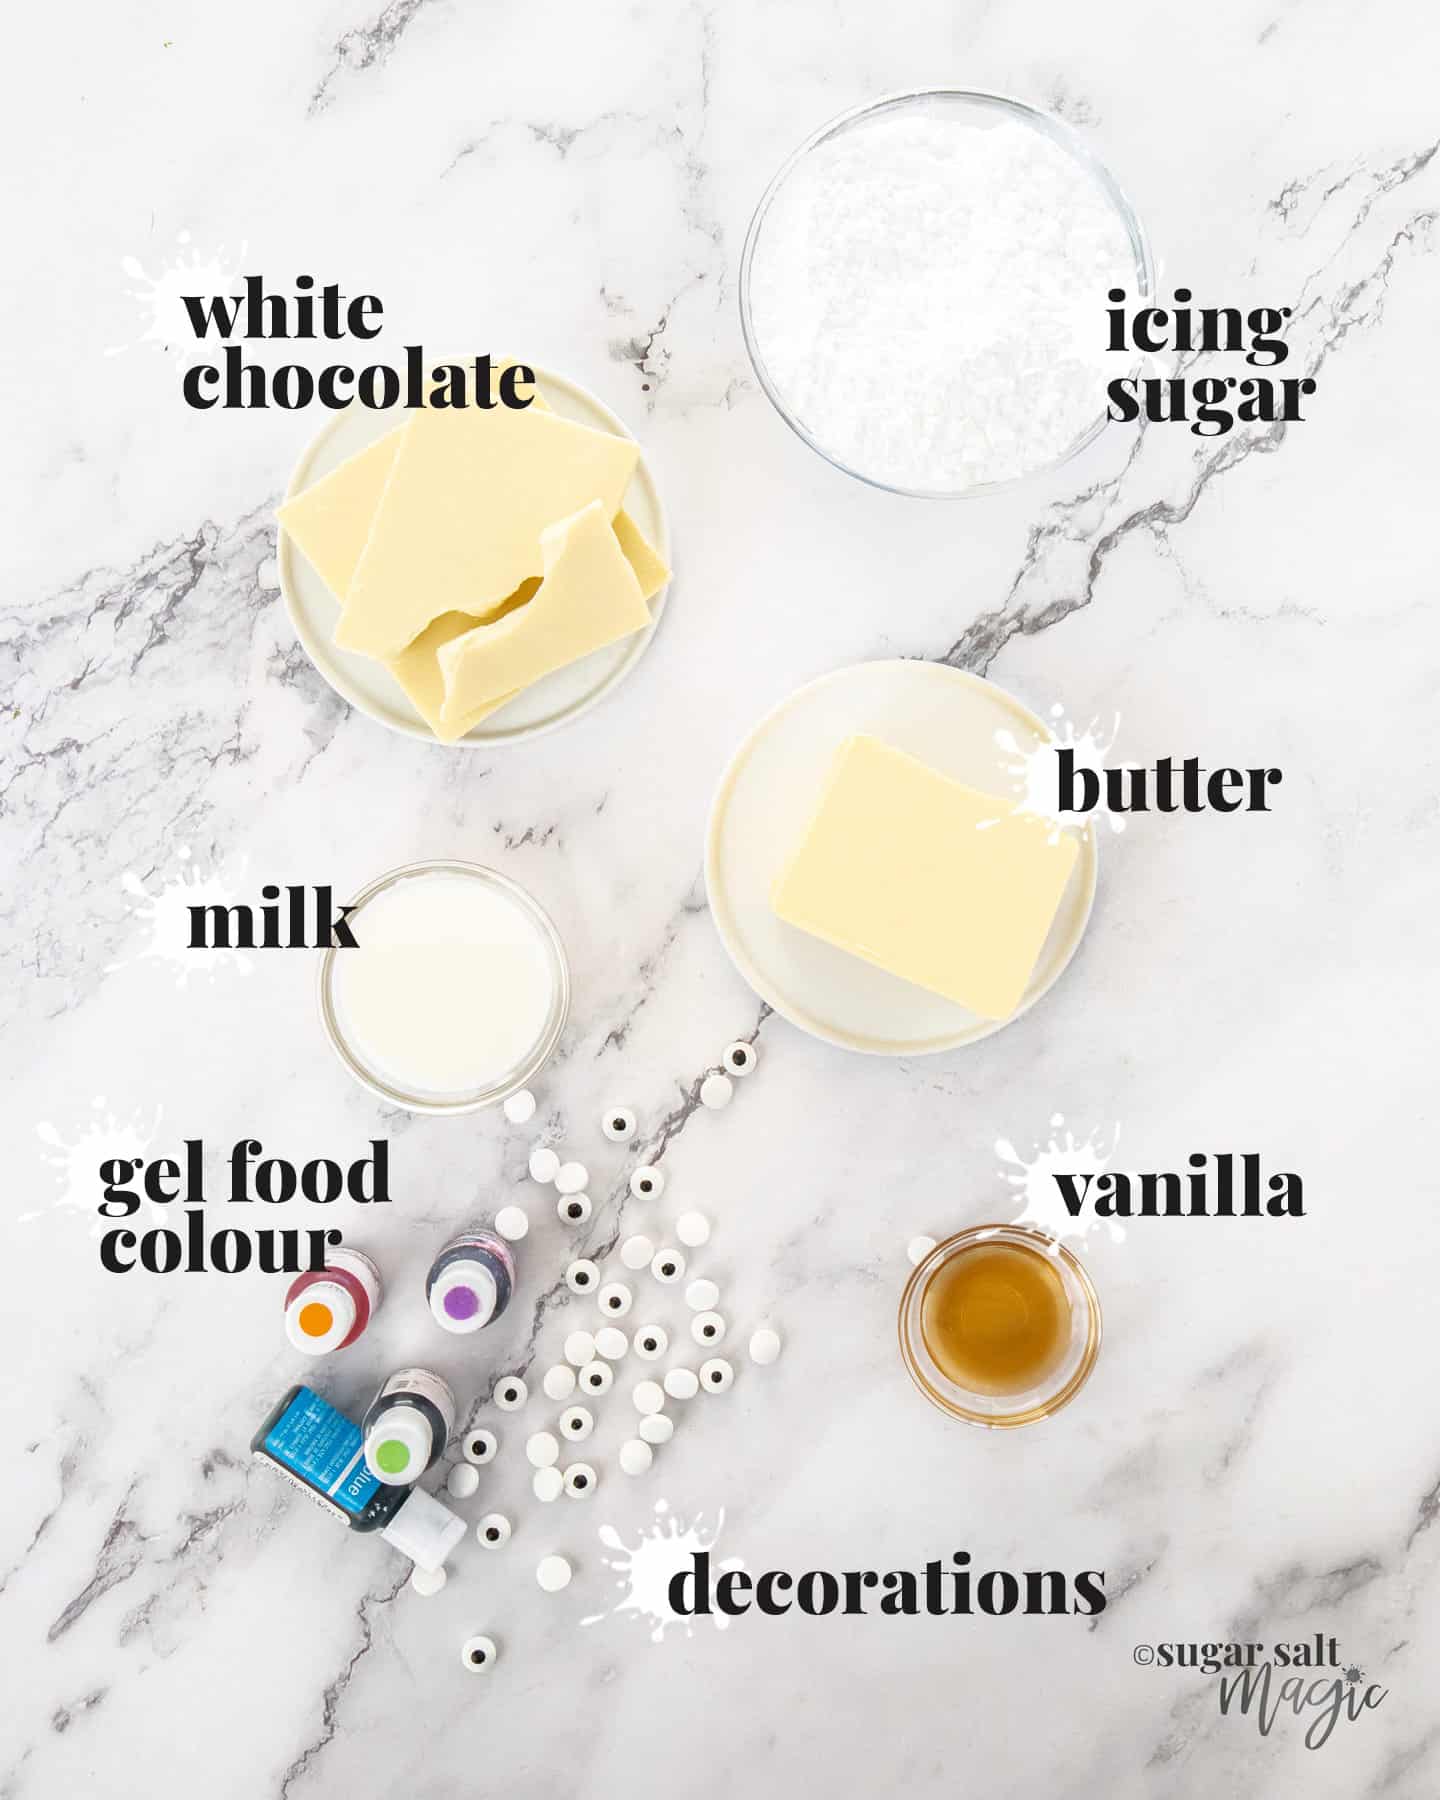 Ingredients for whipped white chocolate buttercream on a marble surface.